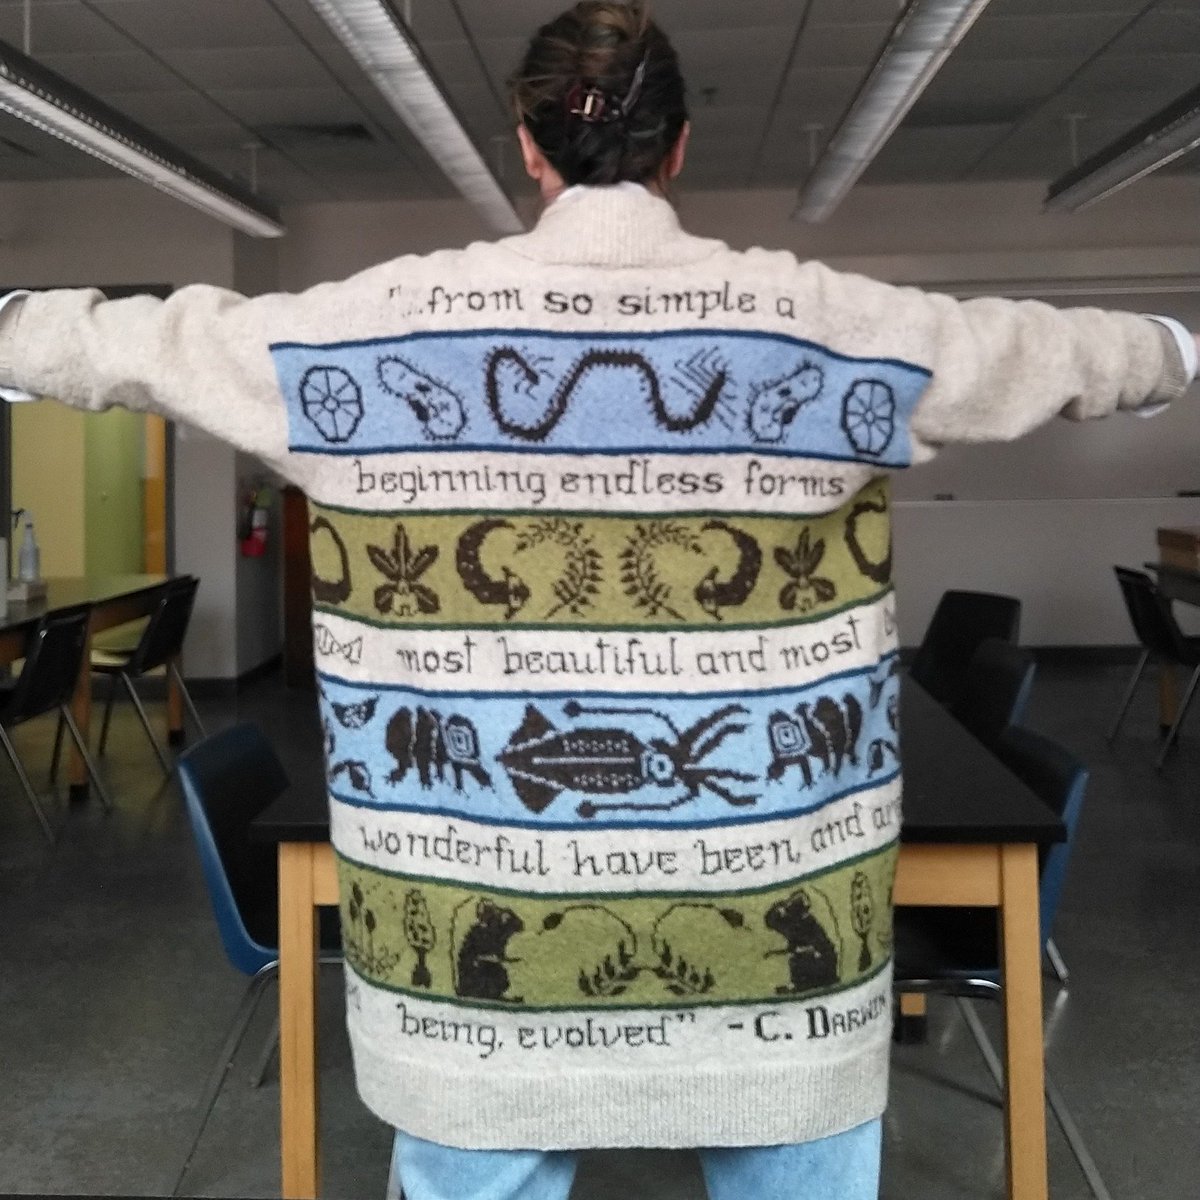 Wrapping up intro biology lab research presentations in style. Hand knitted and designed- every major phyla covered in the class ... and a few prokaryotes and viruses because the microbiologist in my department insisted 😊 I'm sure @markowenmartin would approve of the decision